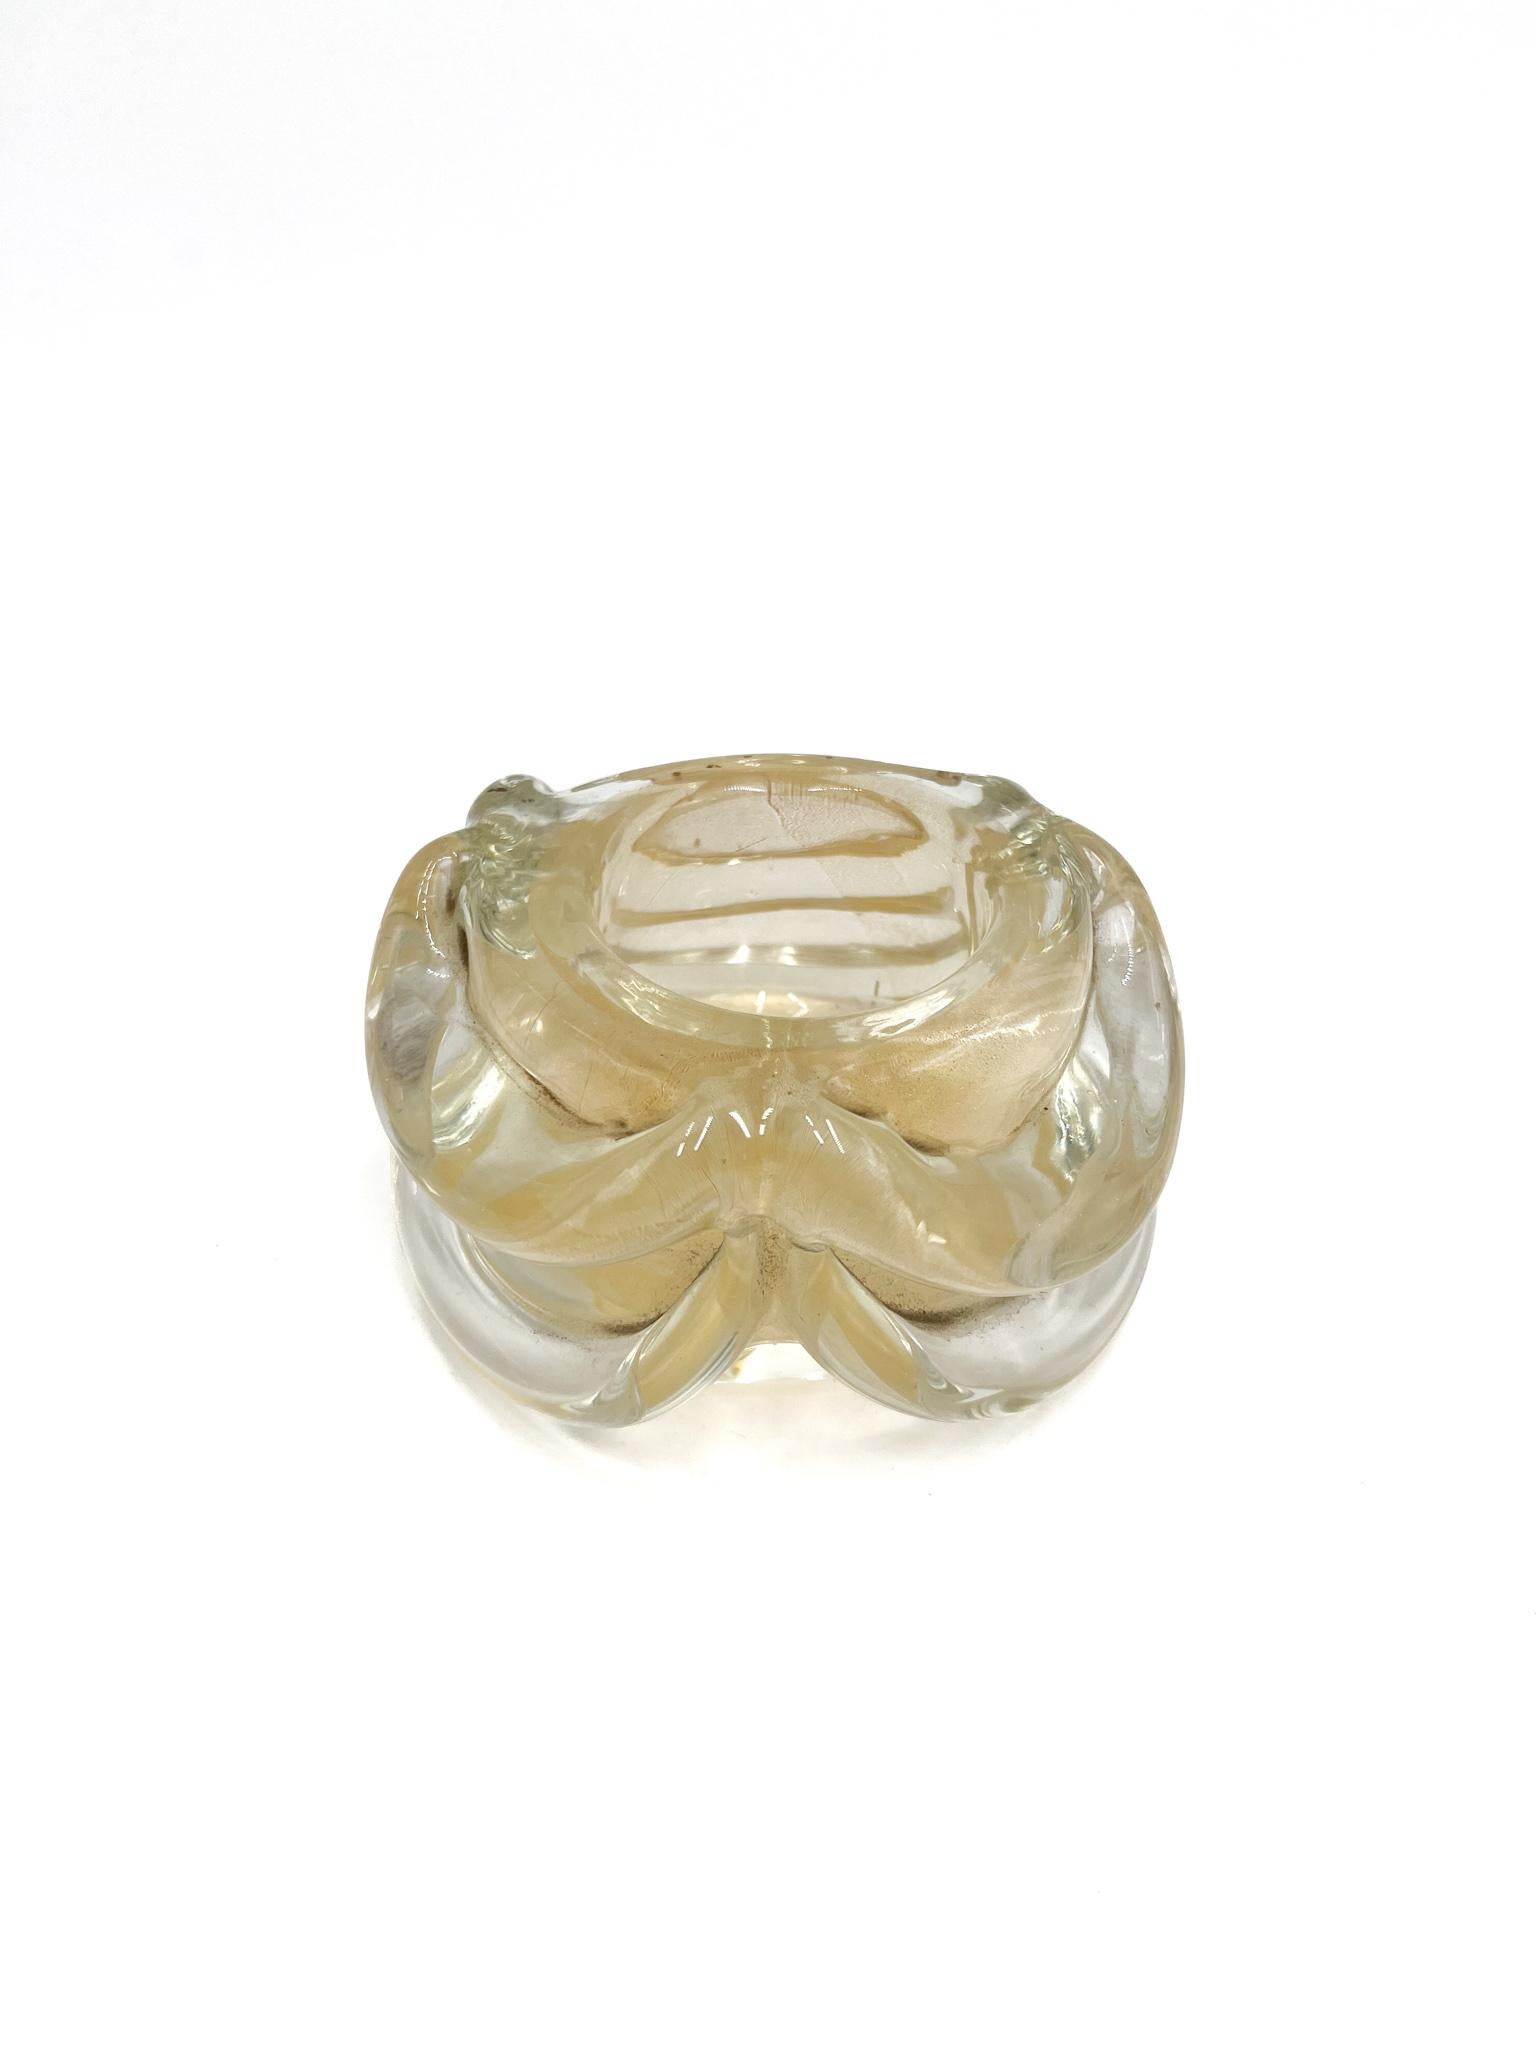 Golden Murano glass ashtray, realized by Cenedese in the 1960s

Shape and color are particular, with golden lights in the inside, typical of the Cenedese master glass production in lines and shades.

Simone Cenedese has been producing artistic